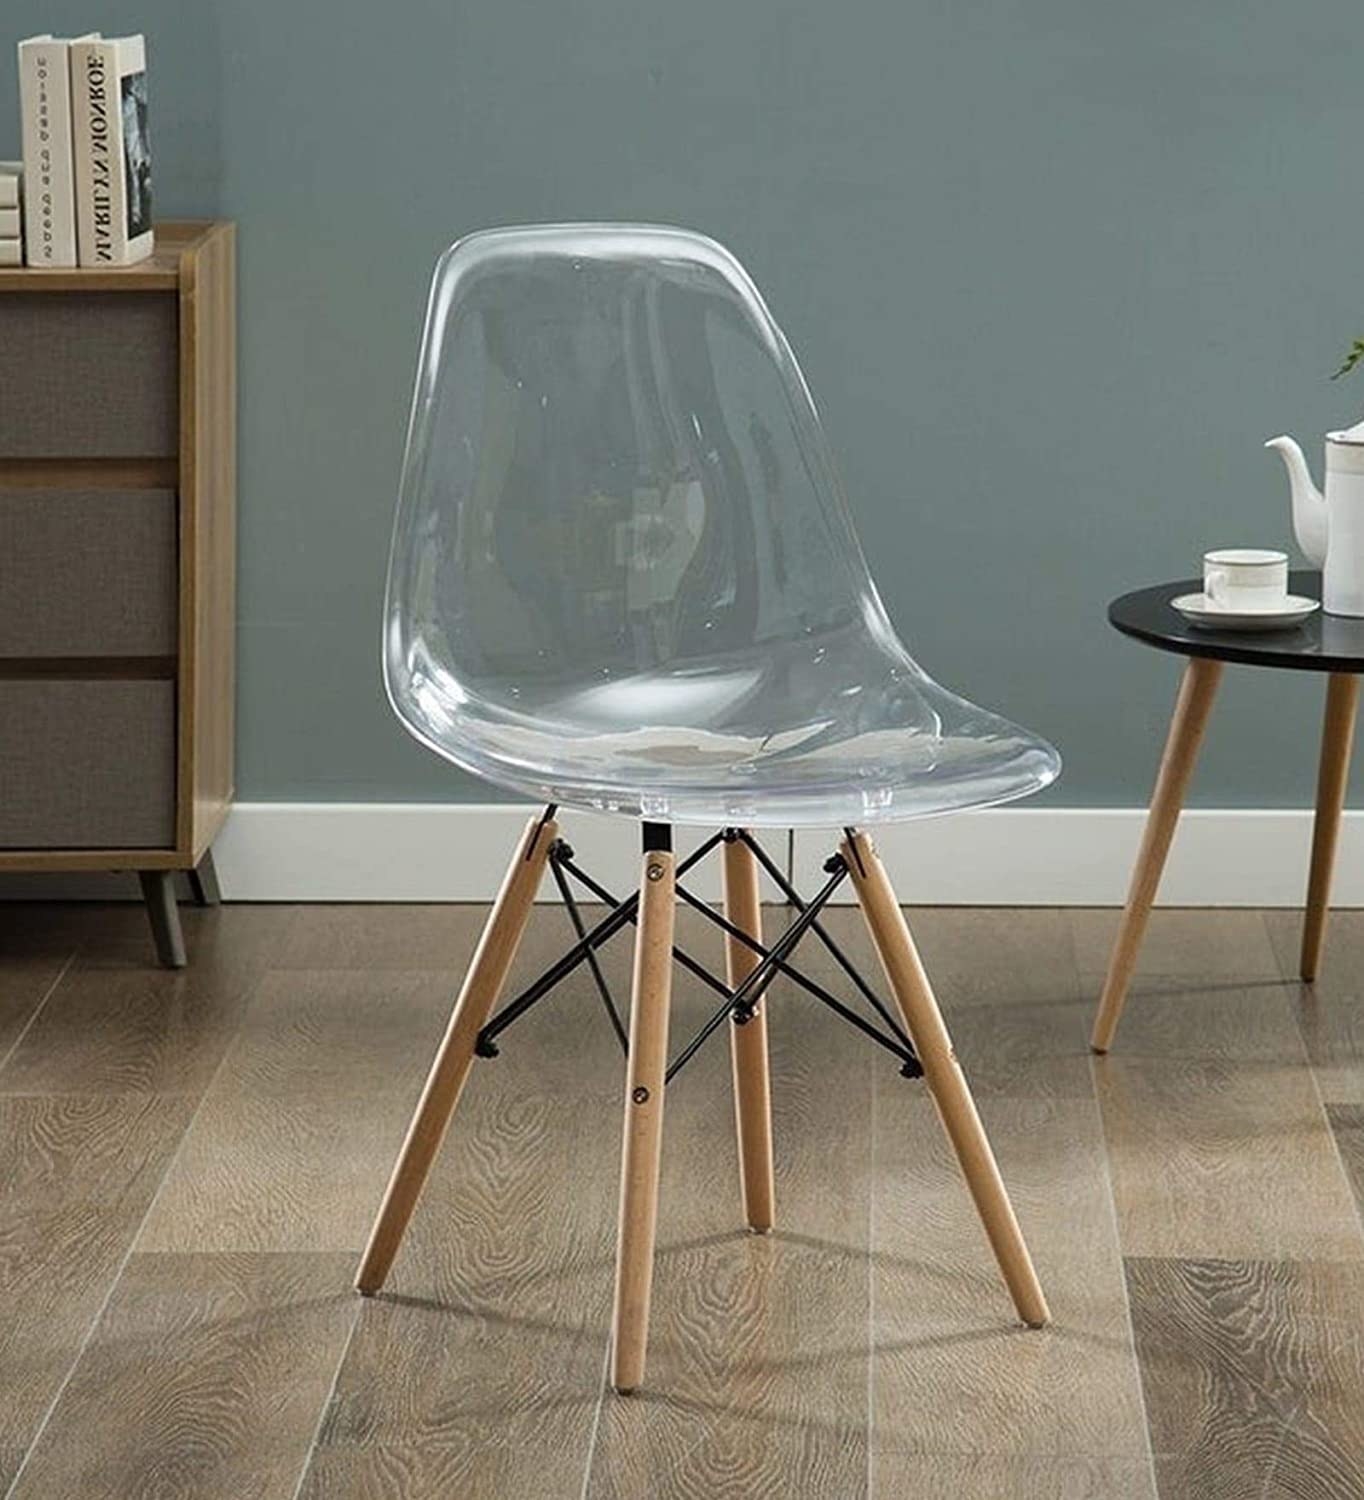 A chair with an acrylic top and wooden legs